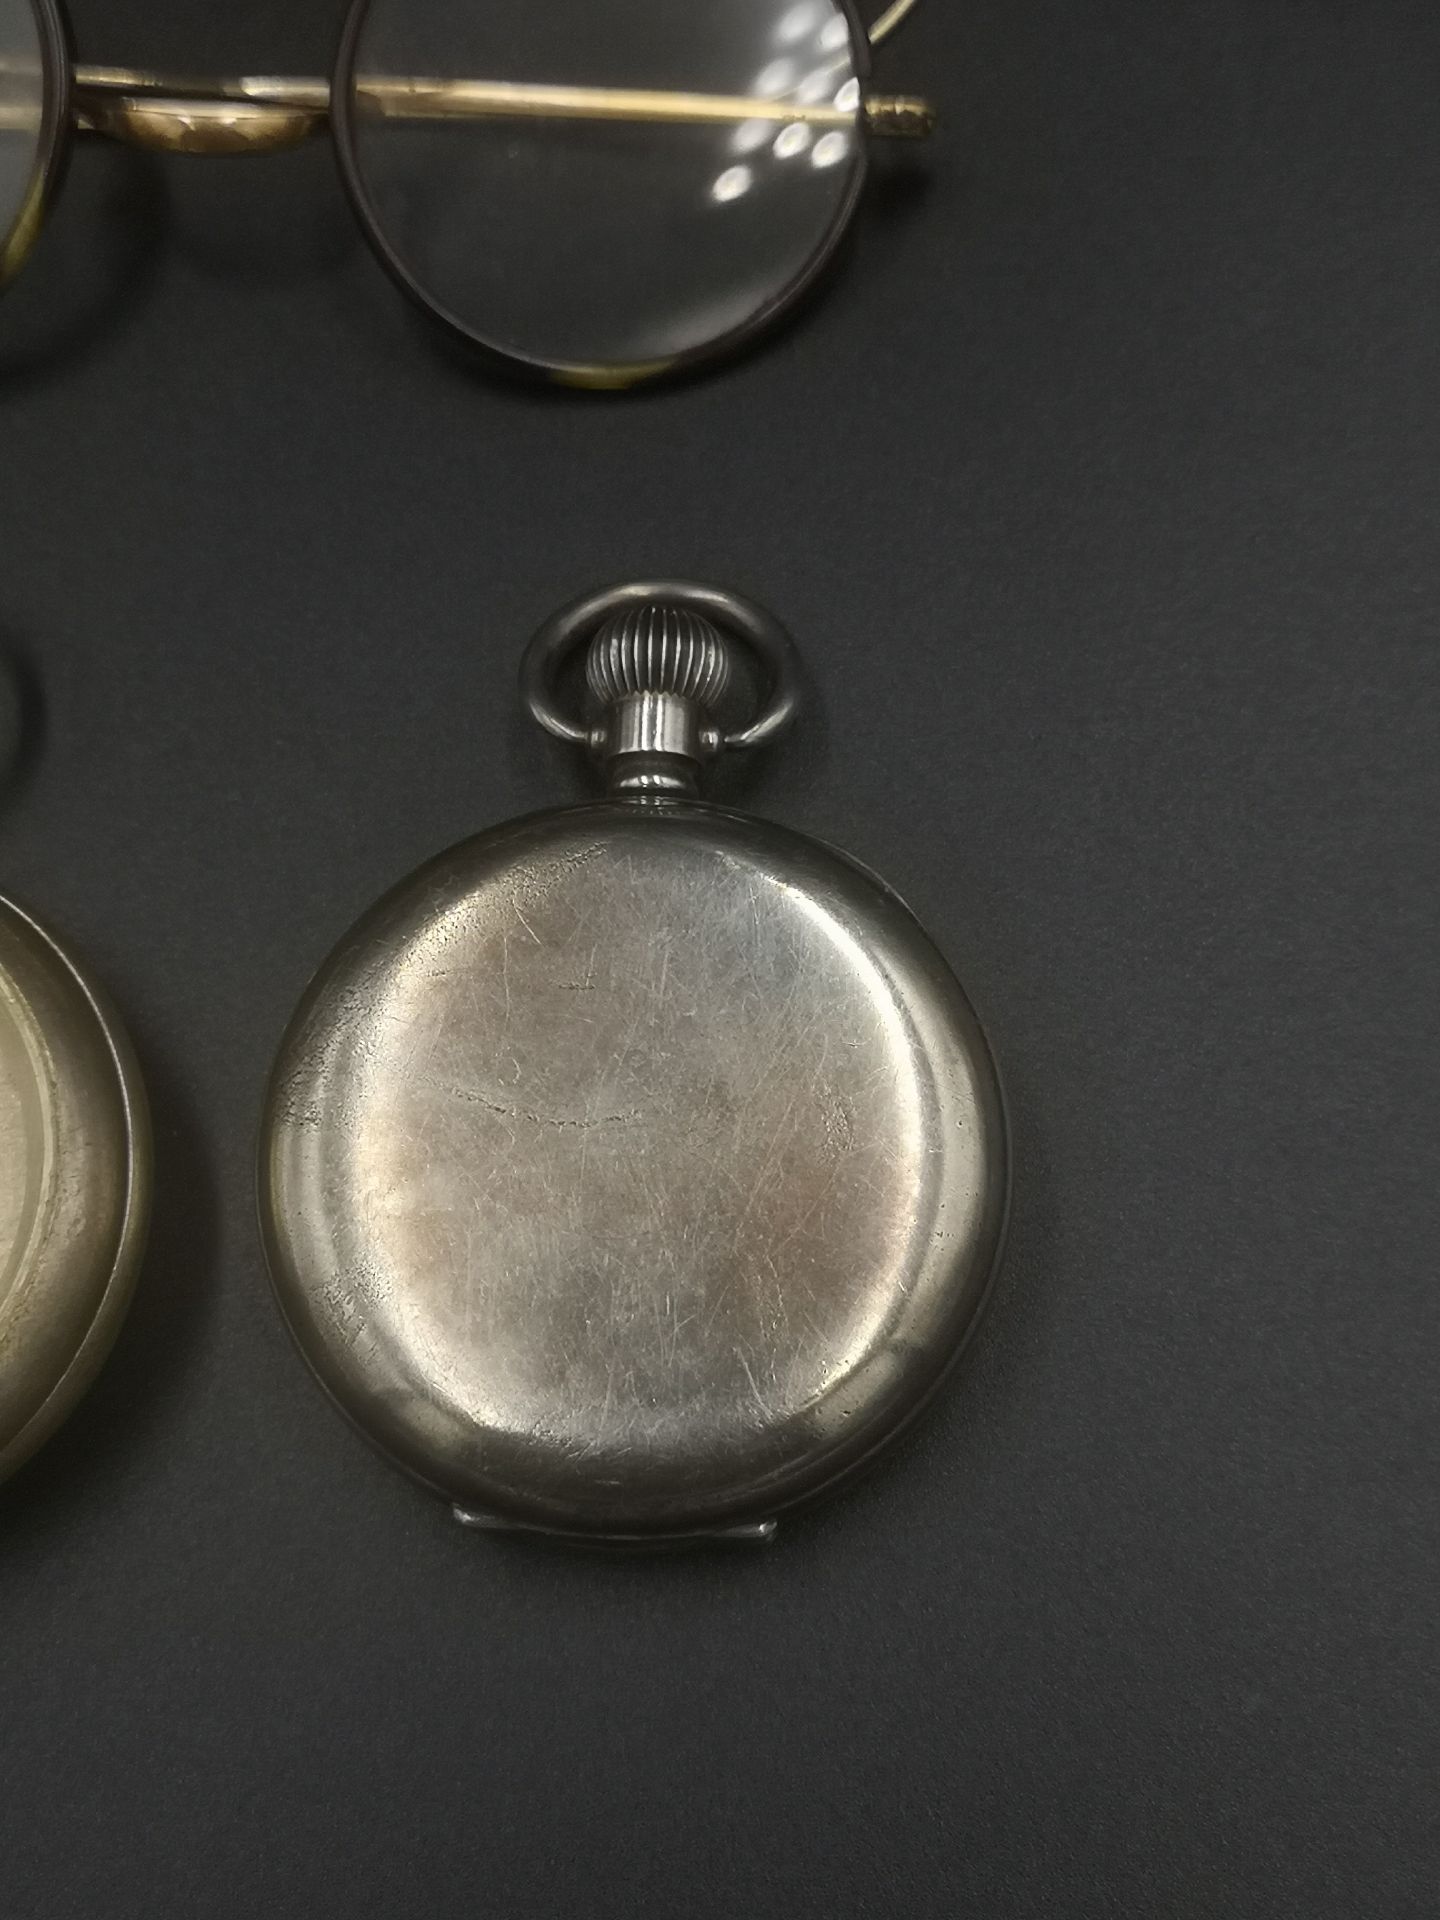 Waltham silver cased pocket watch; a pocket watch; rolled gold pair of spectacles - Image 5 of 7